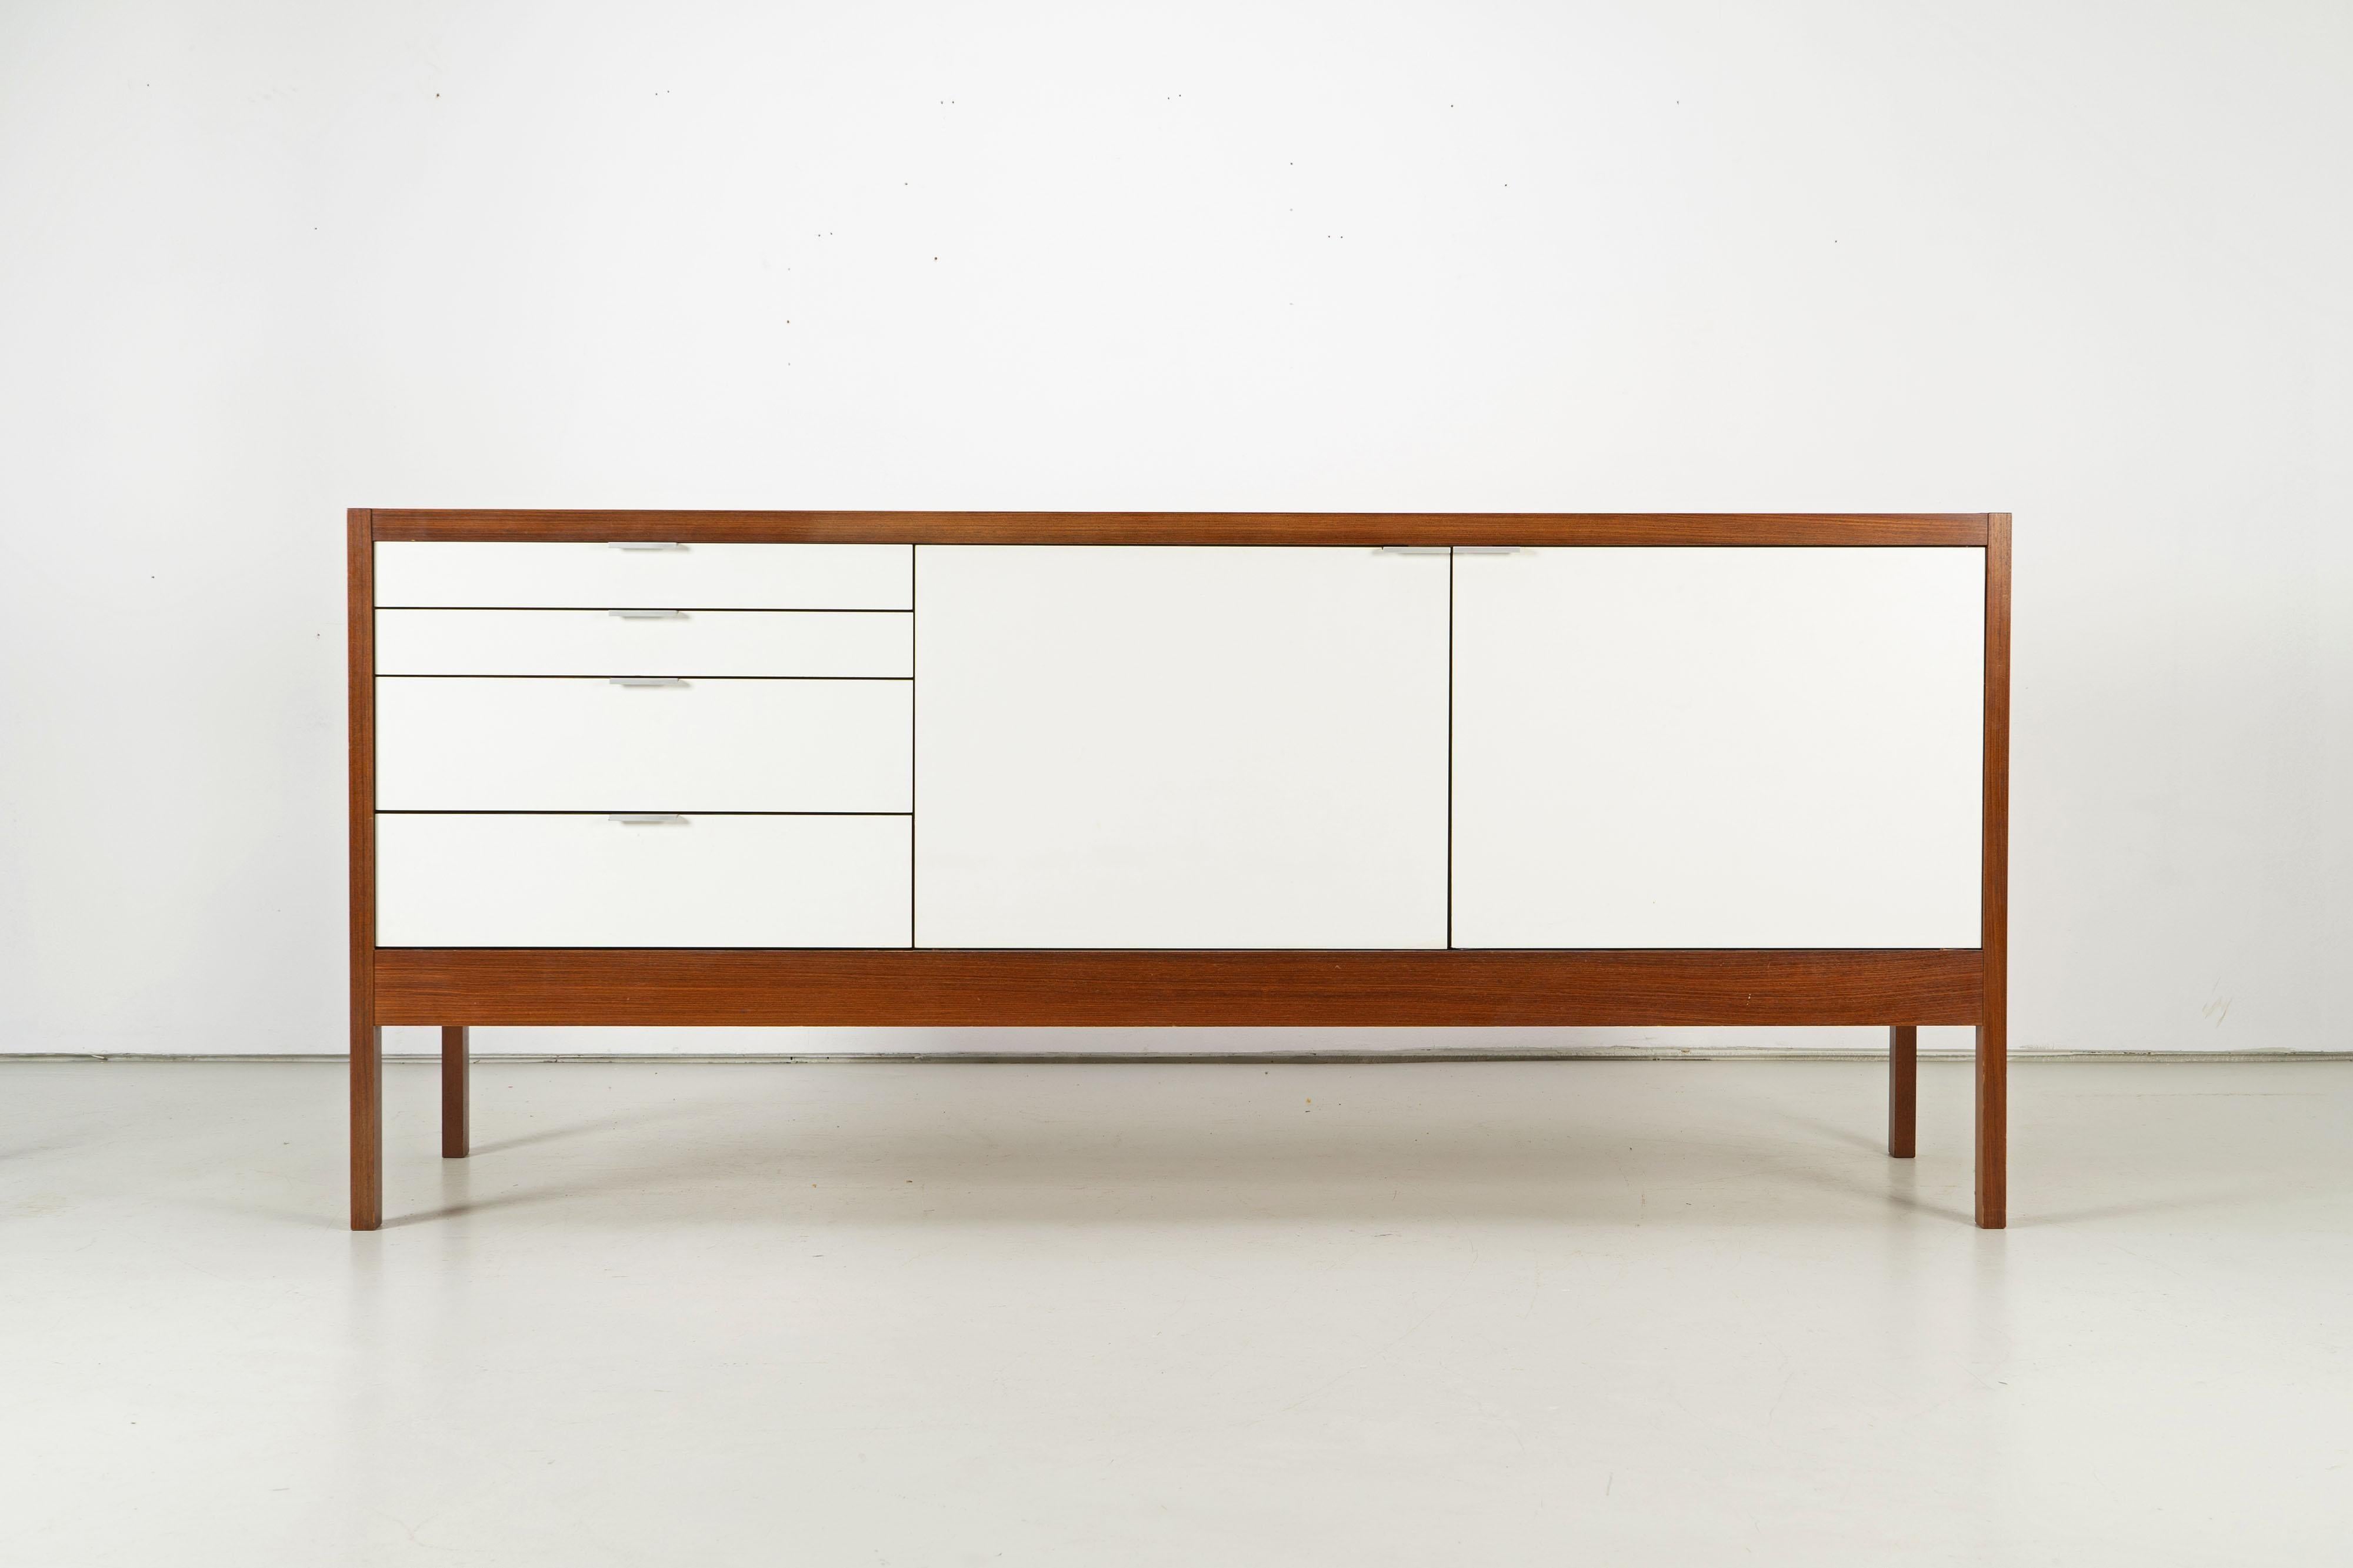 Dieter Waeckerlin designed the Series 3 sideboard for Idealheim in 1963. Four drawers of different sizes and two doors form the front of the piece of furniture. Three slide-in shelves, that can be used at different heights, emerge behind the